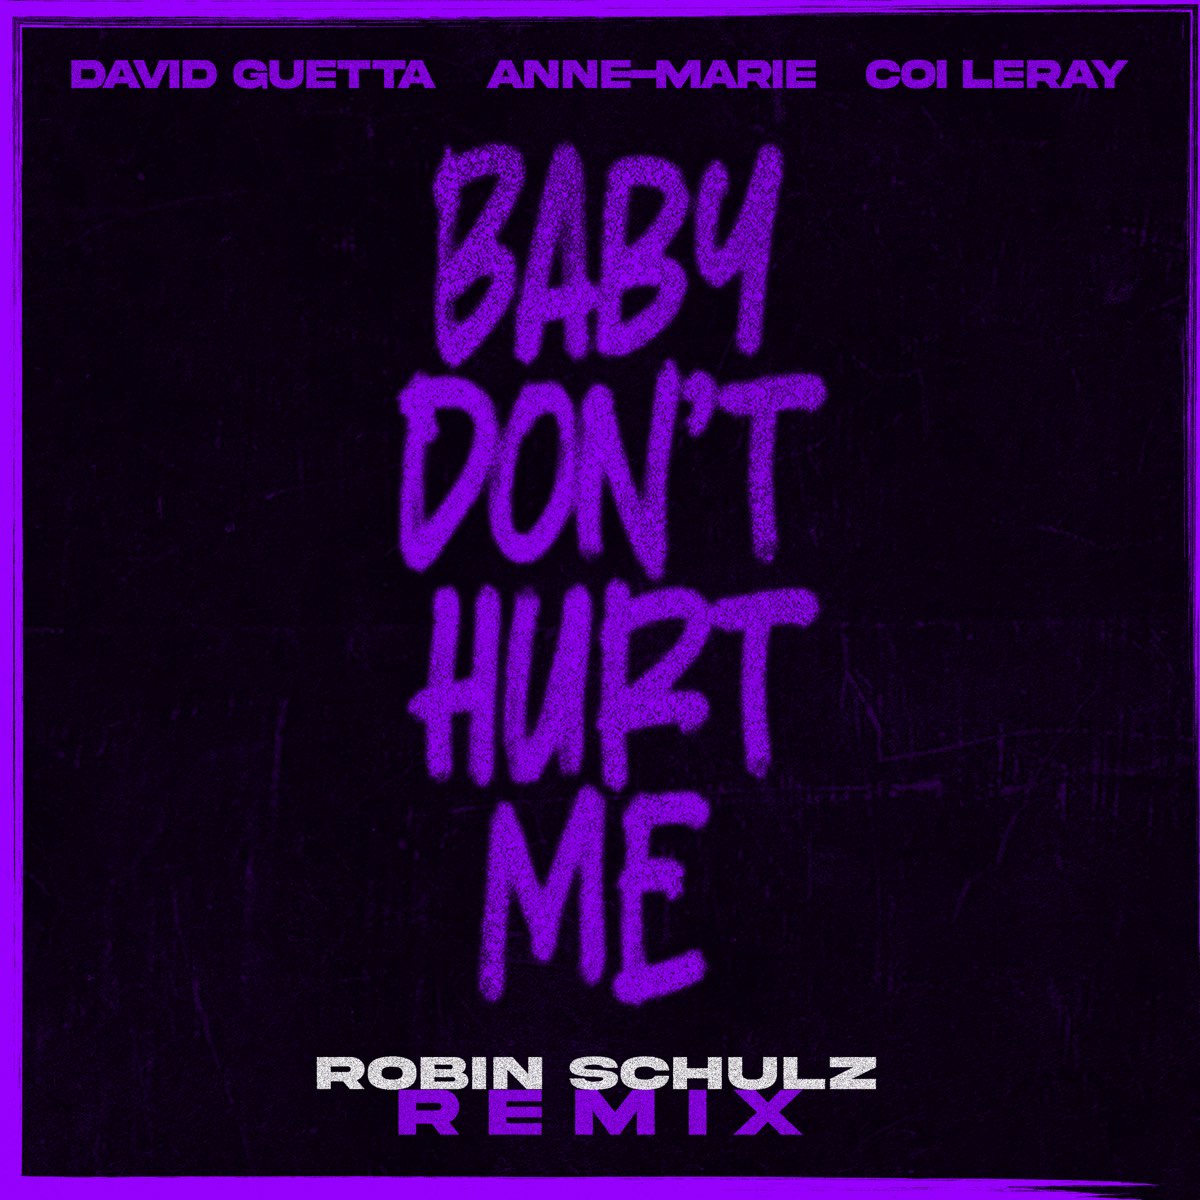 David guetta anne marie baby. Baby don't hurt me David Guetta. David Guetta, Anne-Marie, coi Leray - Baby don’t hurt me. David Guetta/Sofi Tukker/Anne-Marie/coi Leray - Baby don't hurt me (Sofi Tukker Remix). Baby font hurt me фото.